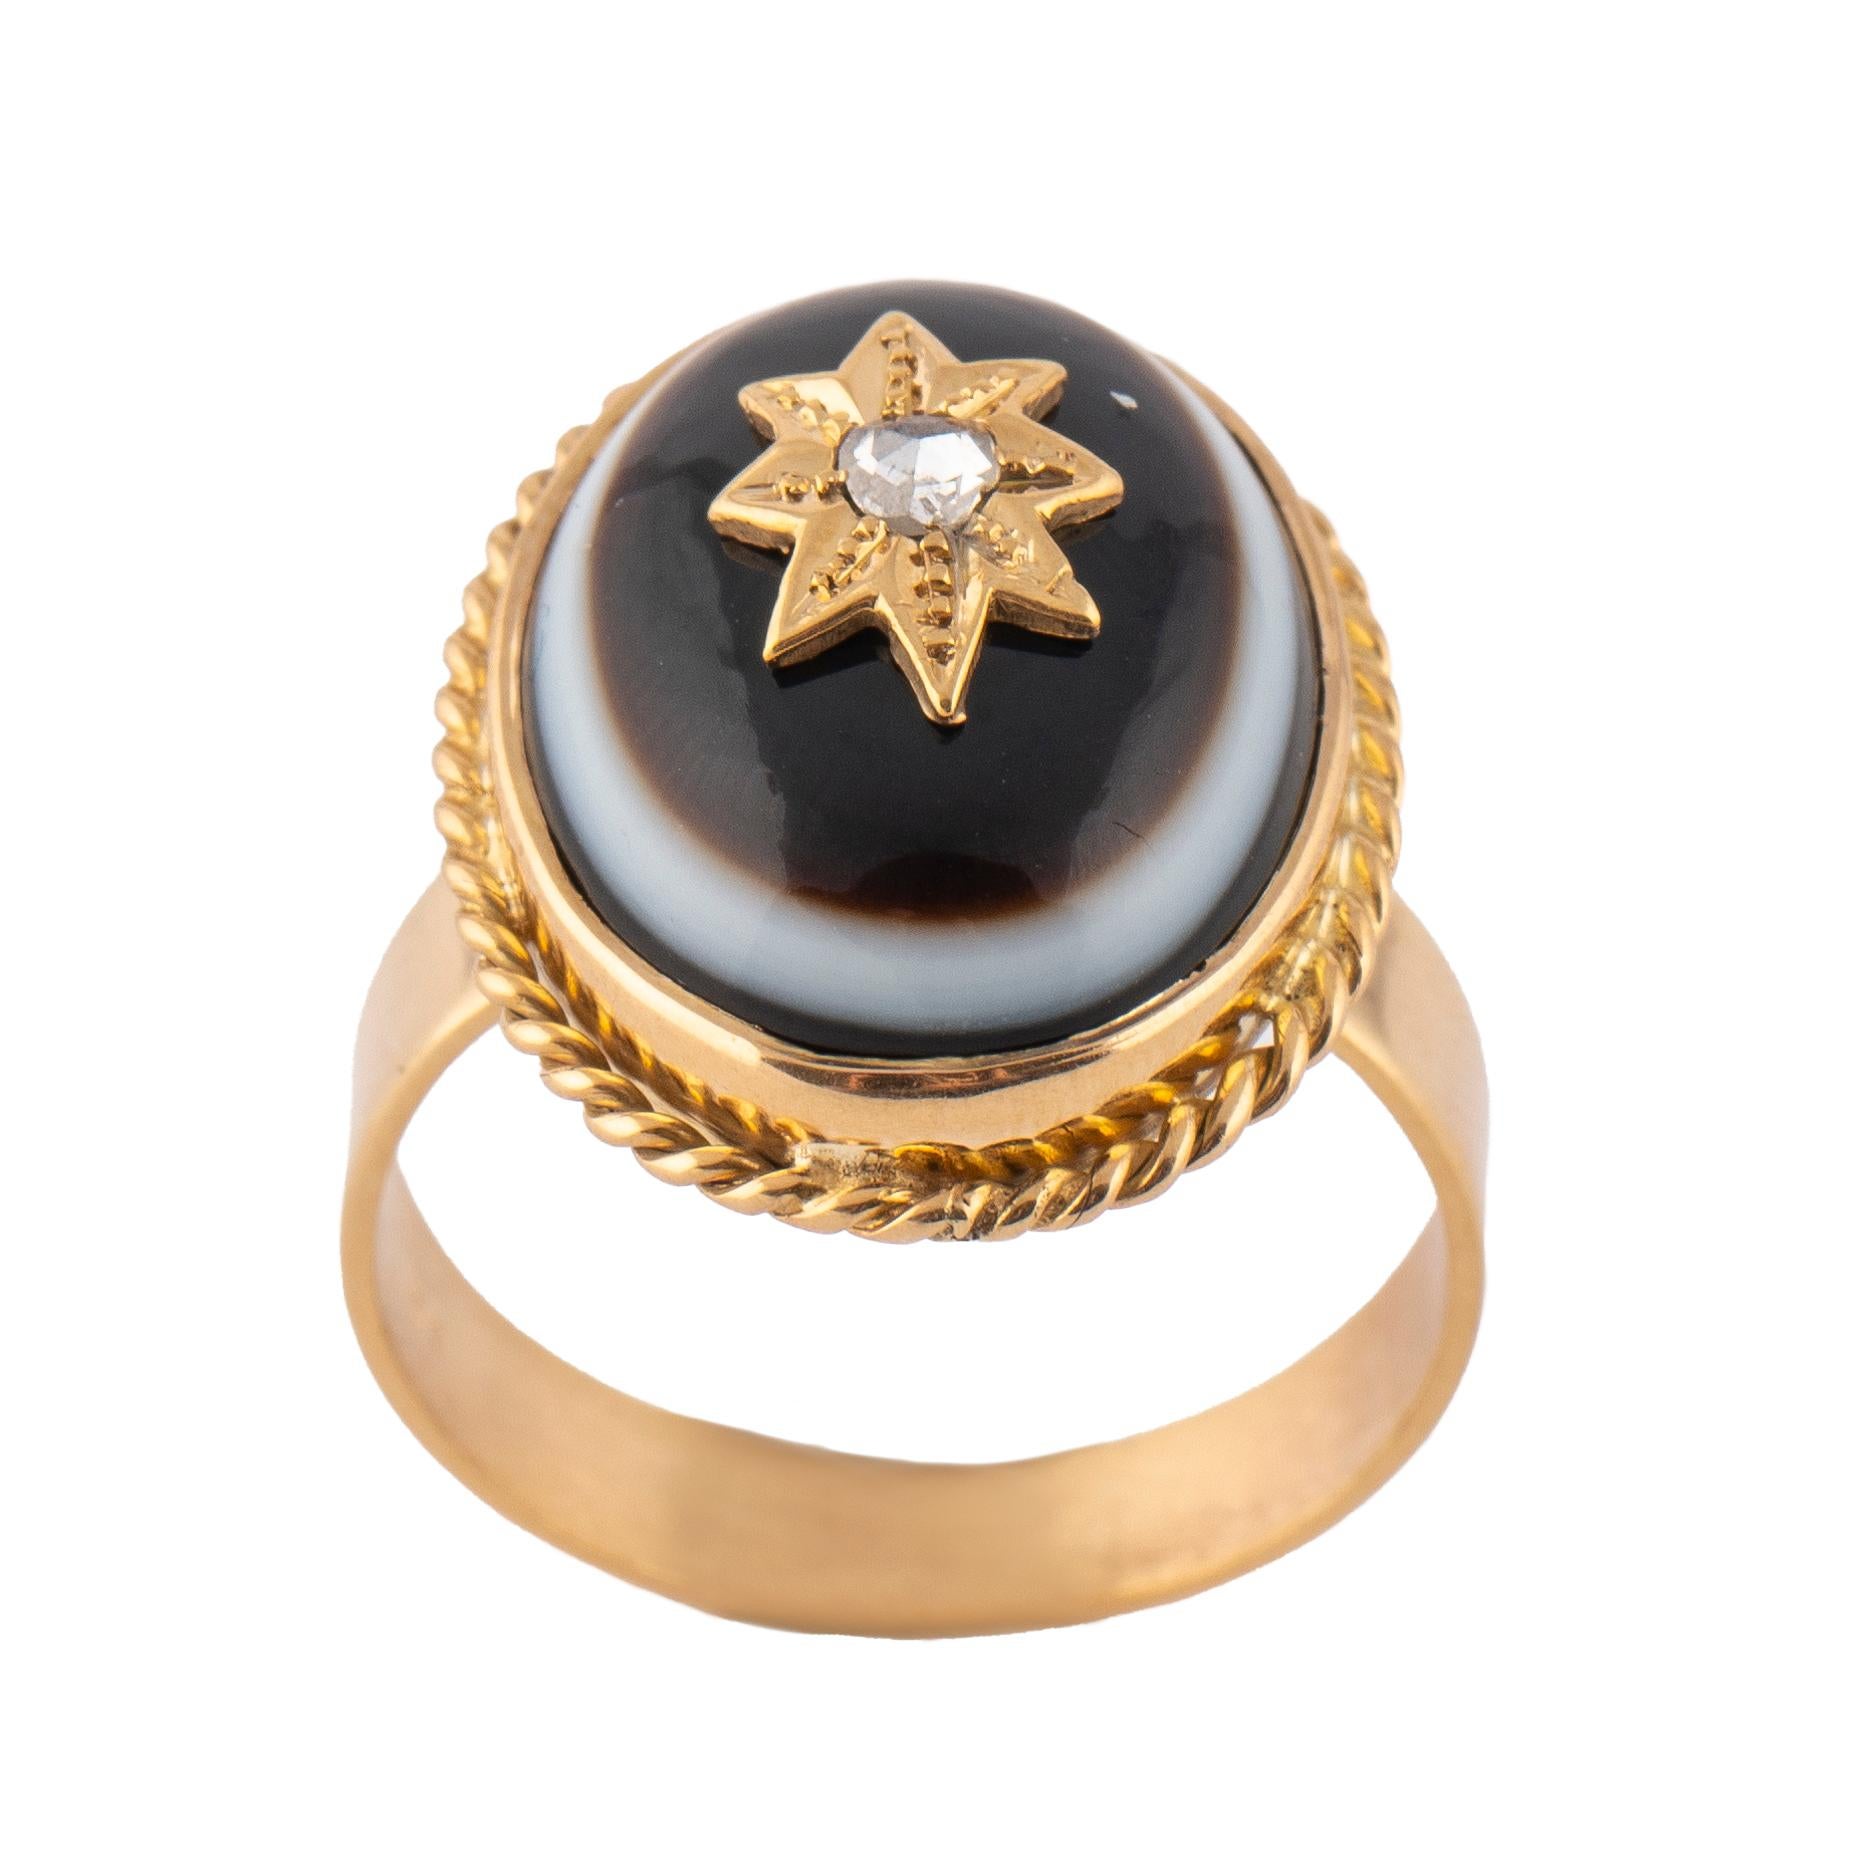 This 14k yellow gold ring is set with an oval late Victorian bull's eye banded agate centered by a rose-cut diamond on a gold star motif, within a twisted ropework border.

Oval bezel: 7/8 in. (2.2 cm) long; ¾ in. (2 cm) wide; 3/8 in. (1 cm)